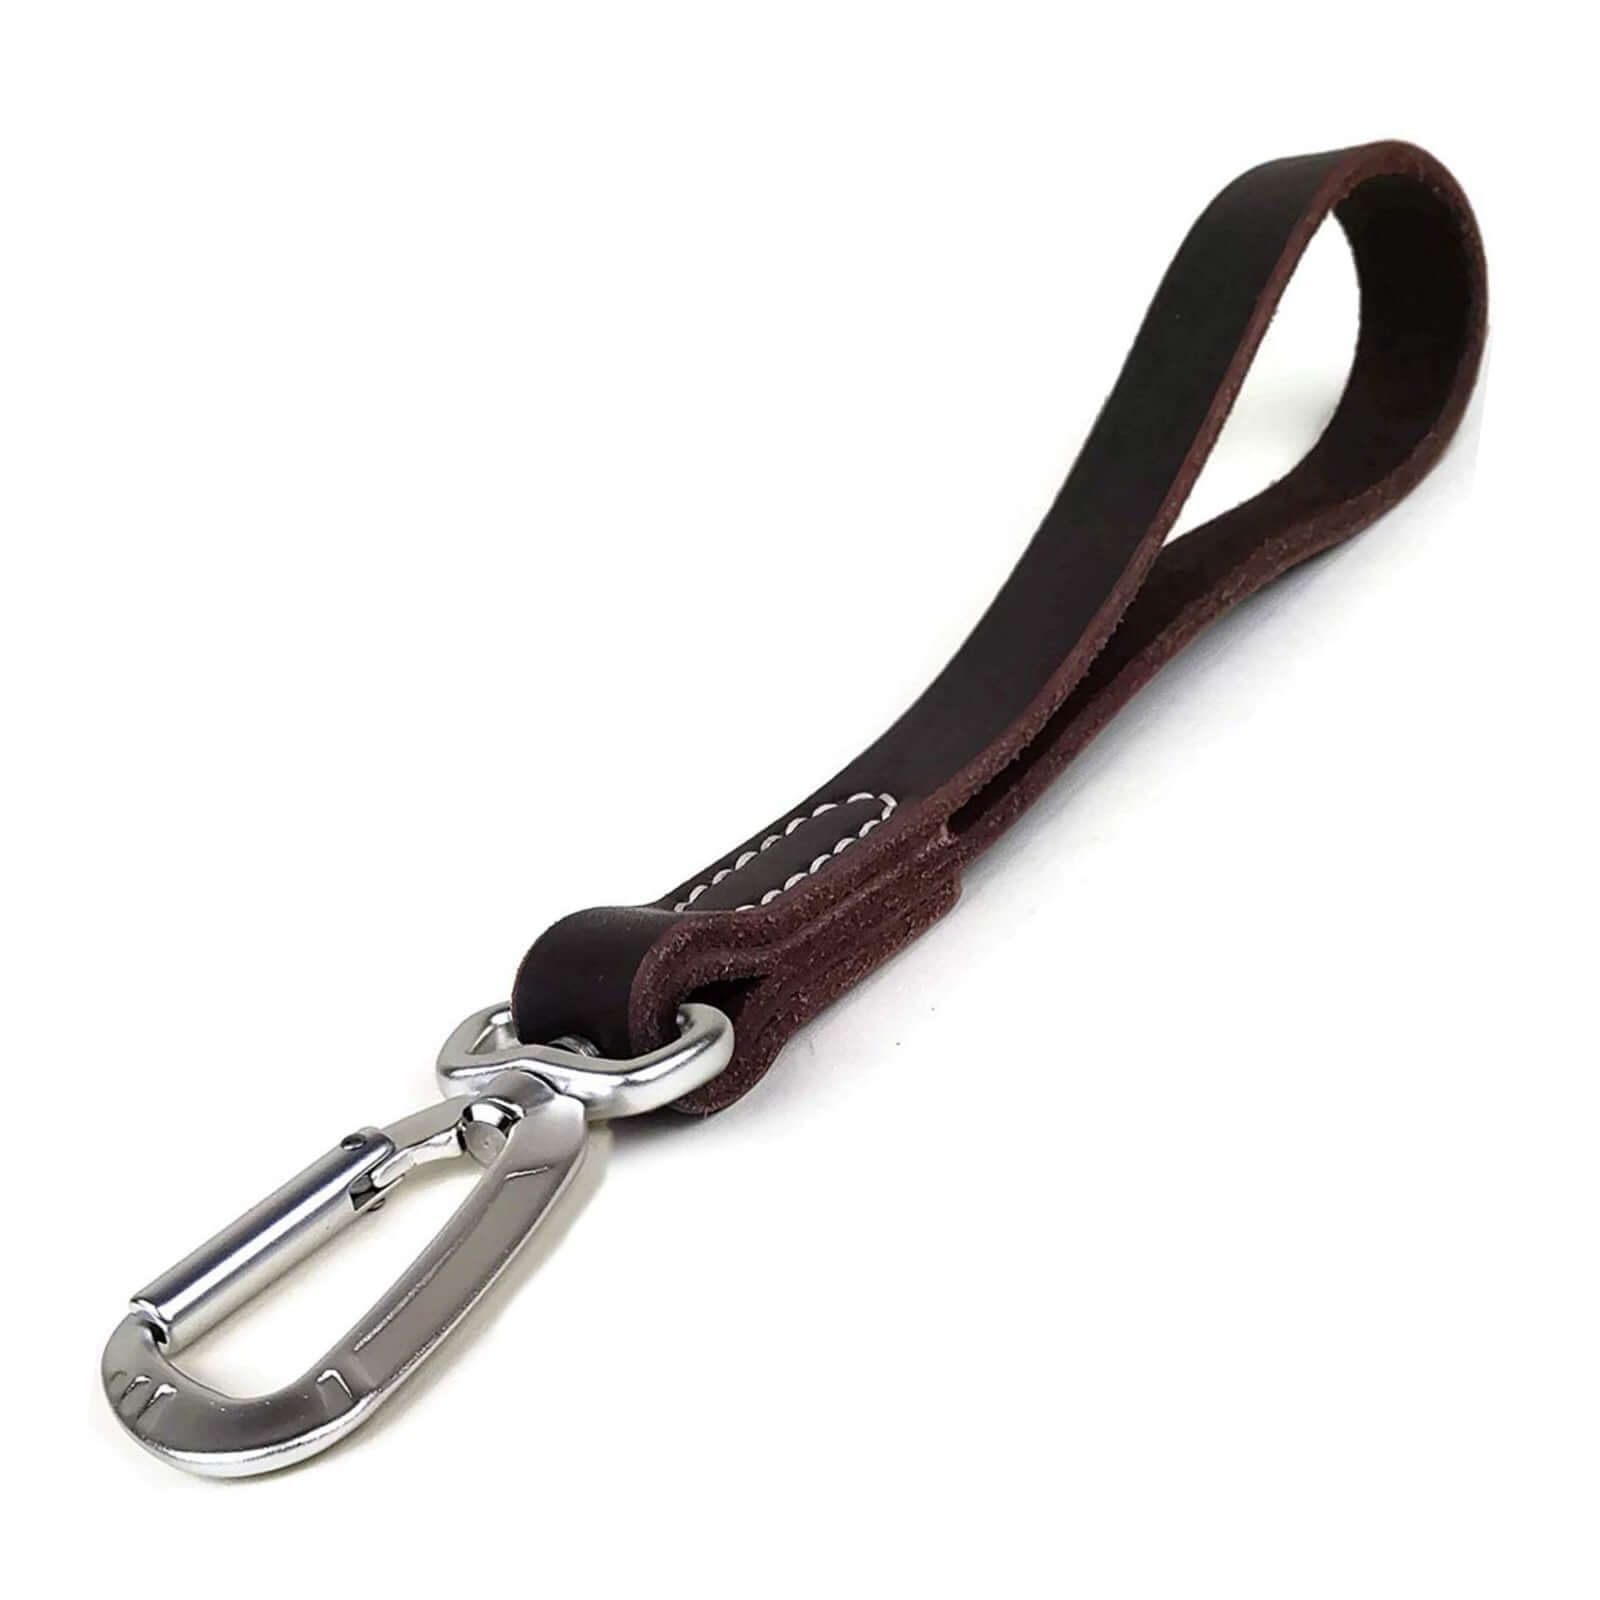 Mighty Paw Leather Leash Tab: Short Dog Leash for Training and Control